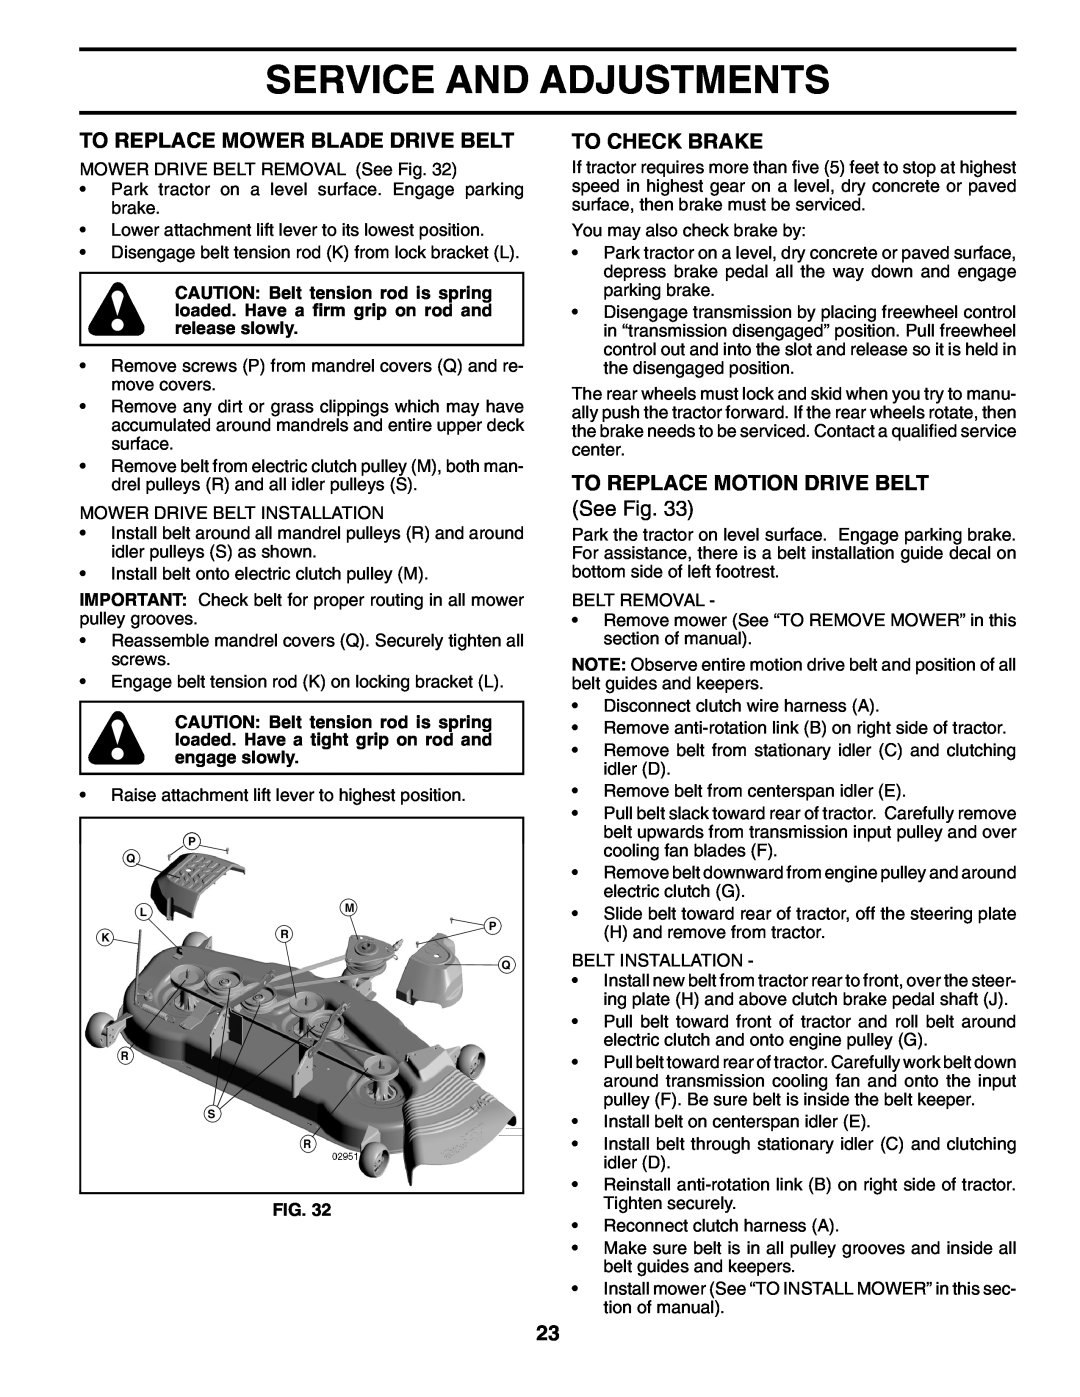 Husqvarna YTH2754XP owner manual To Replace Mower Blade Drive Belt, To Check Brake, To Replace Motion Drive Belt, See Fig 